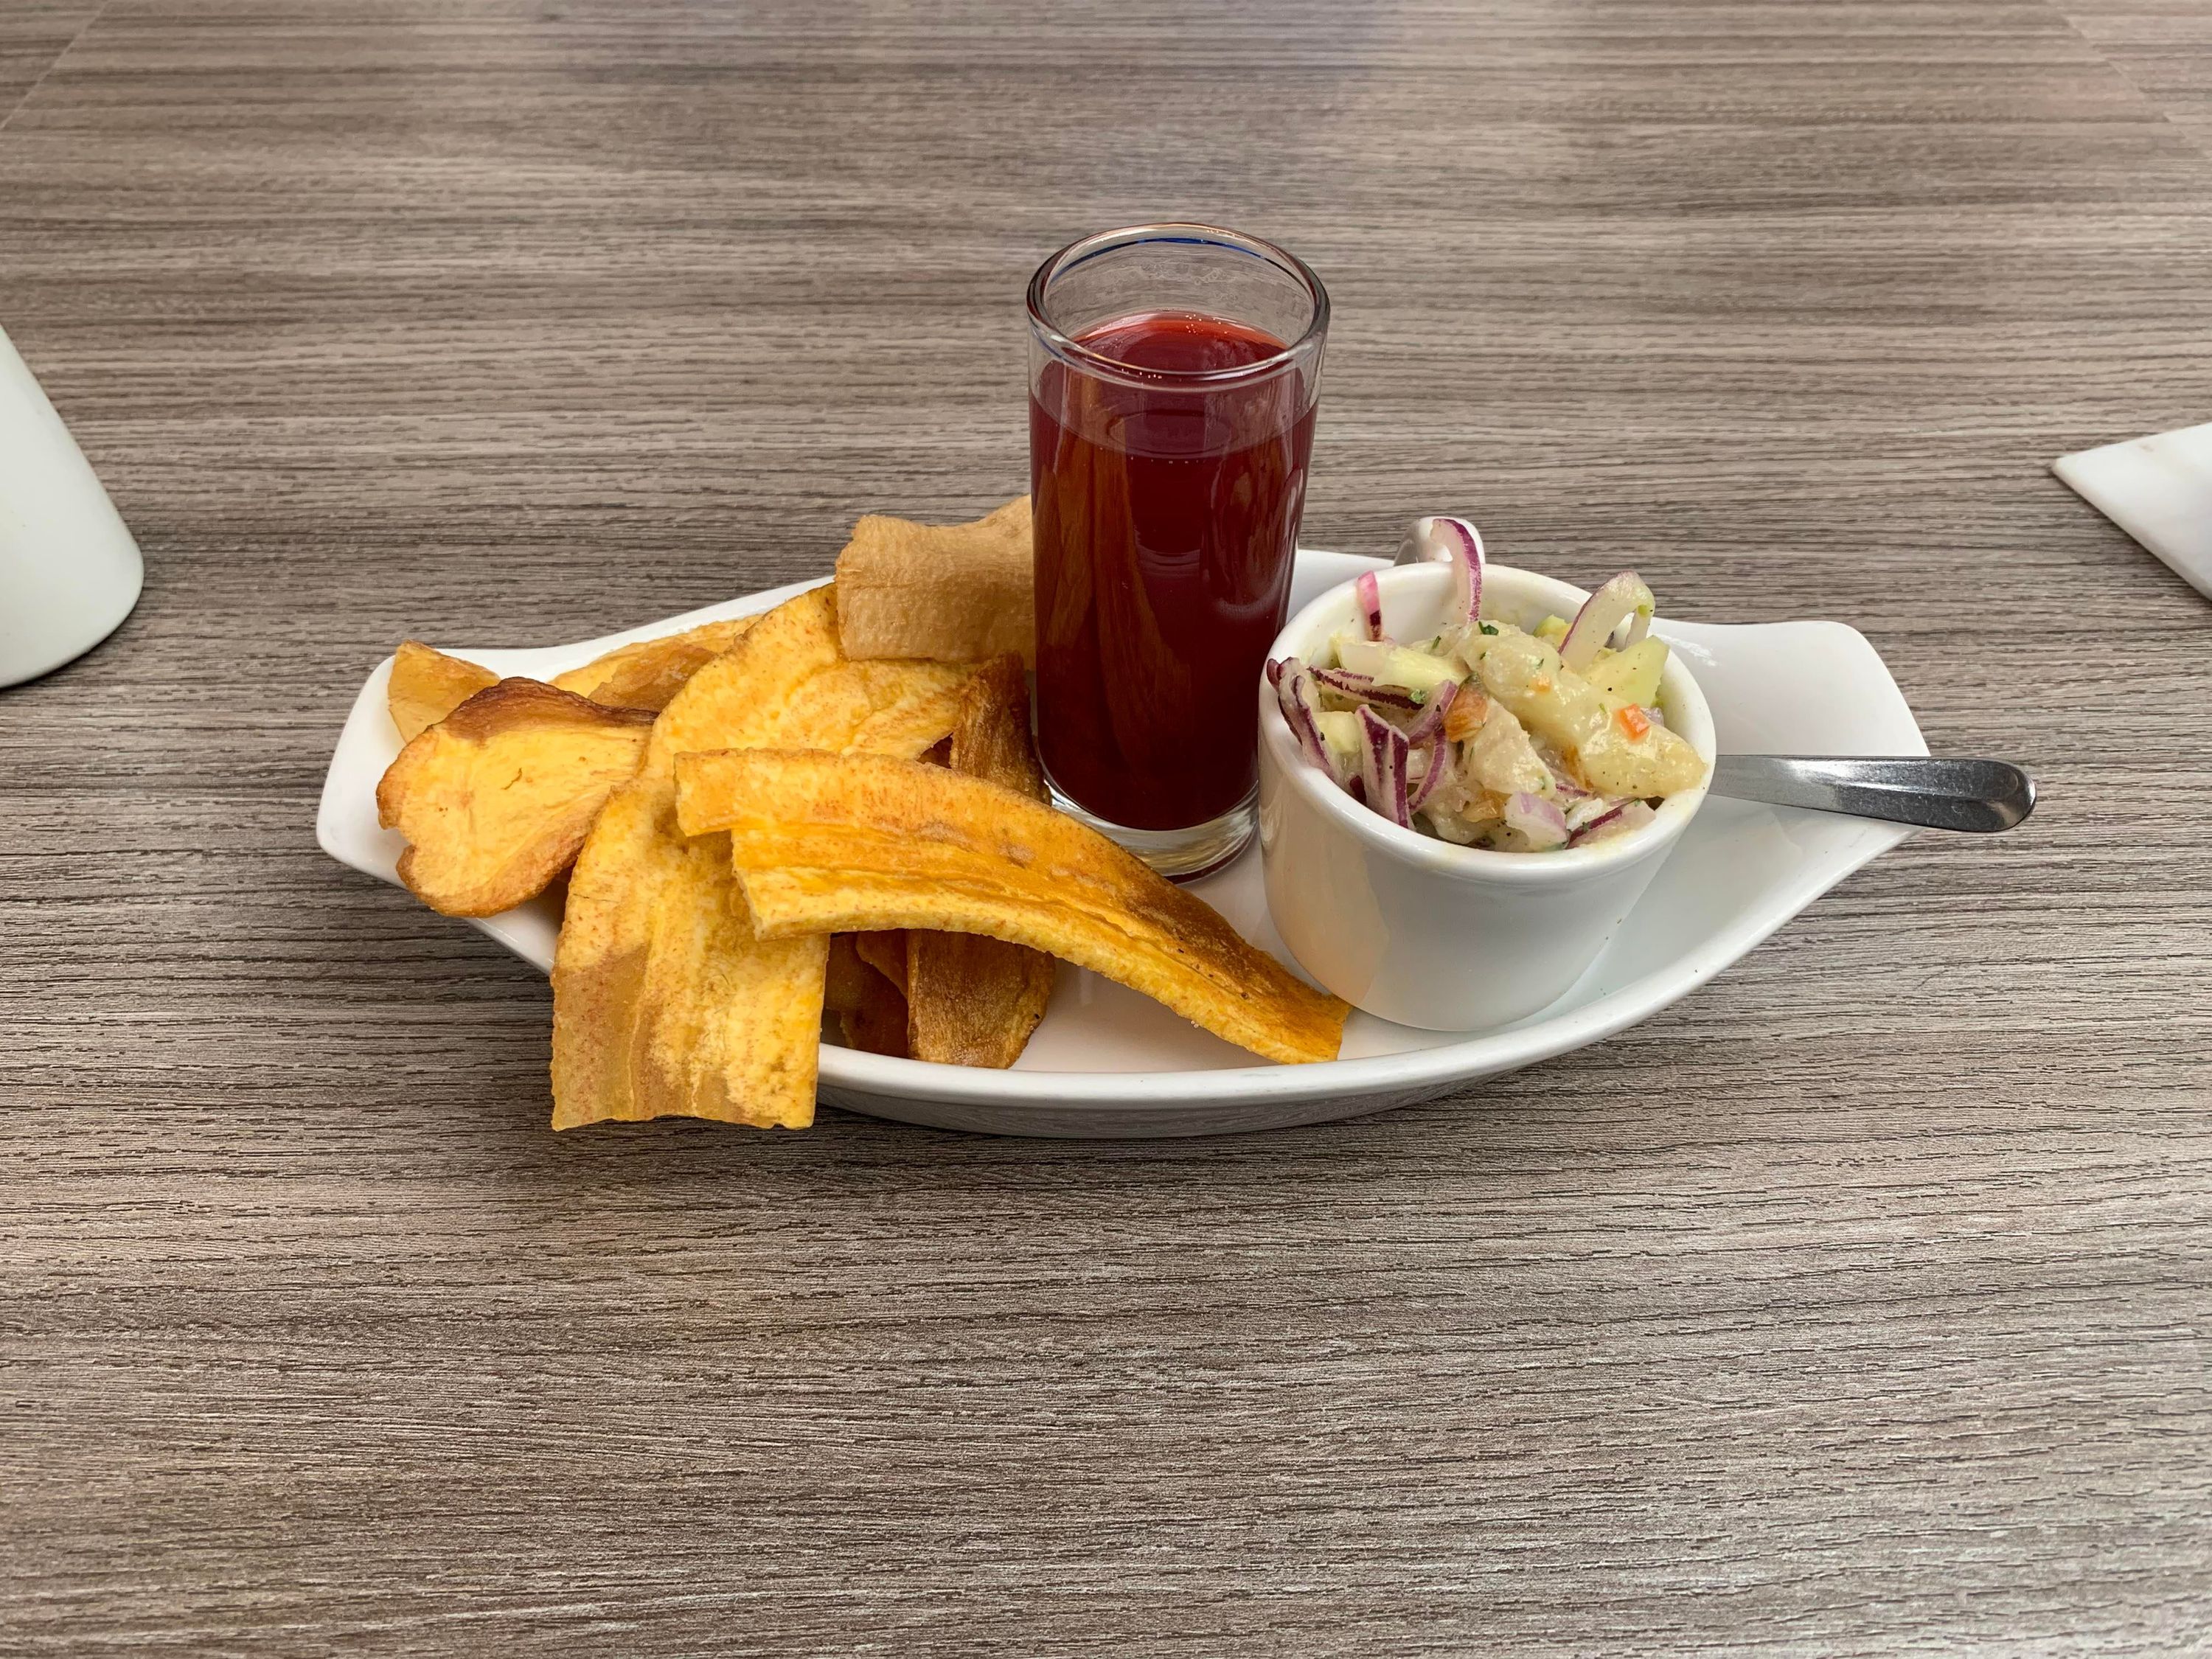 Ceviche, Plantain Chips, and Colombia Grape Juice